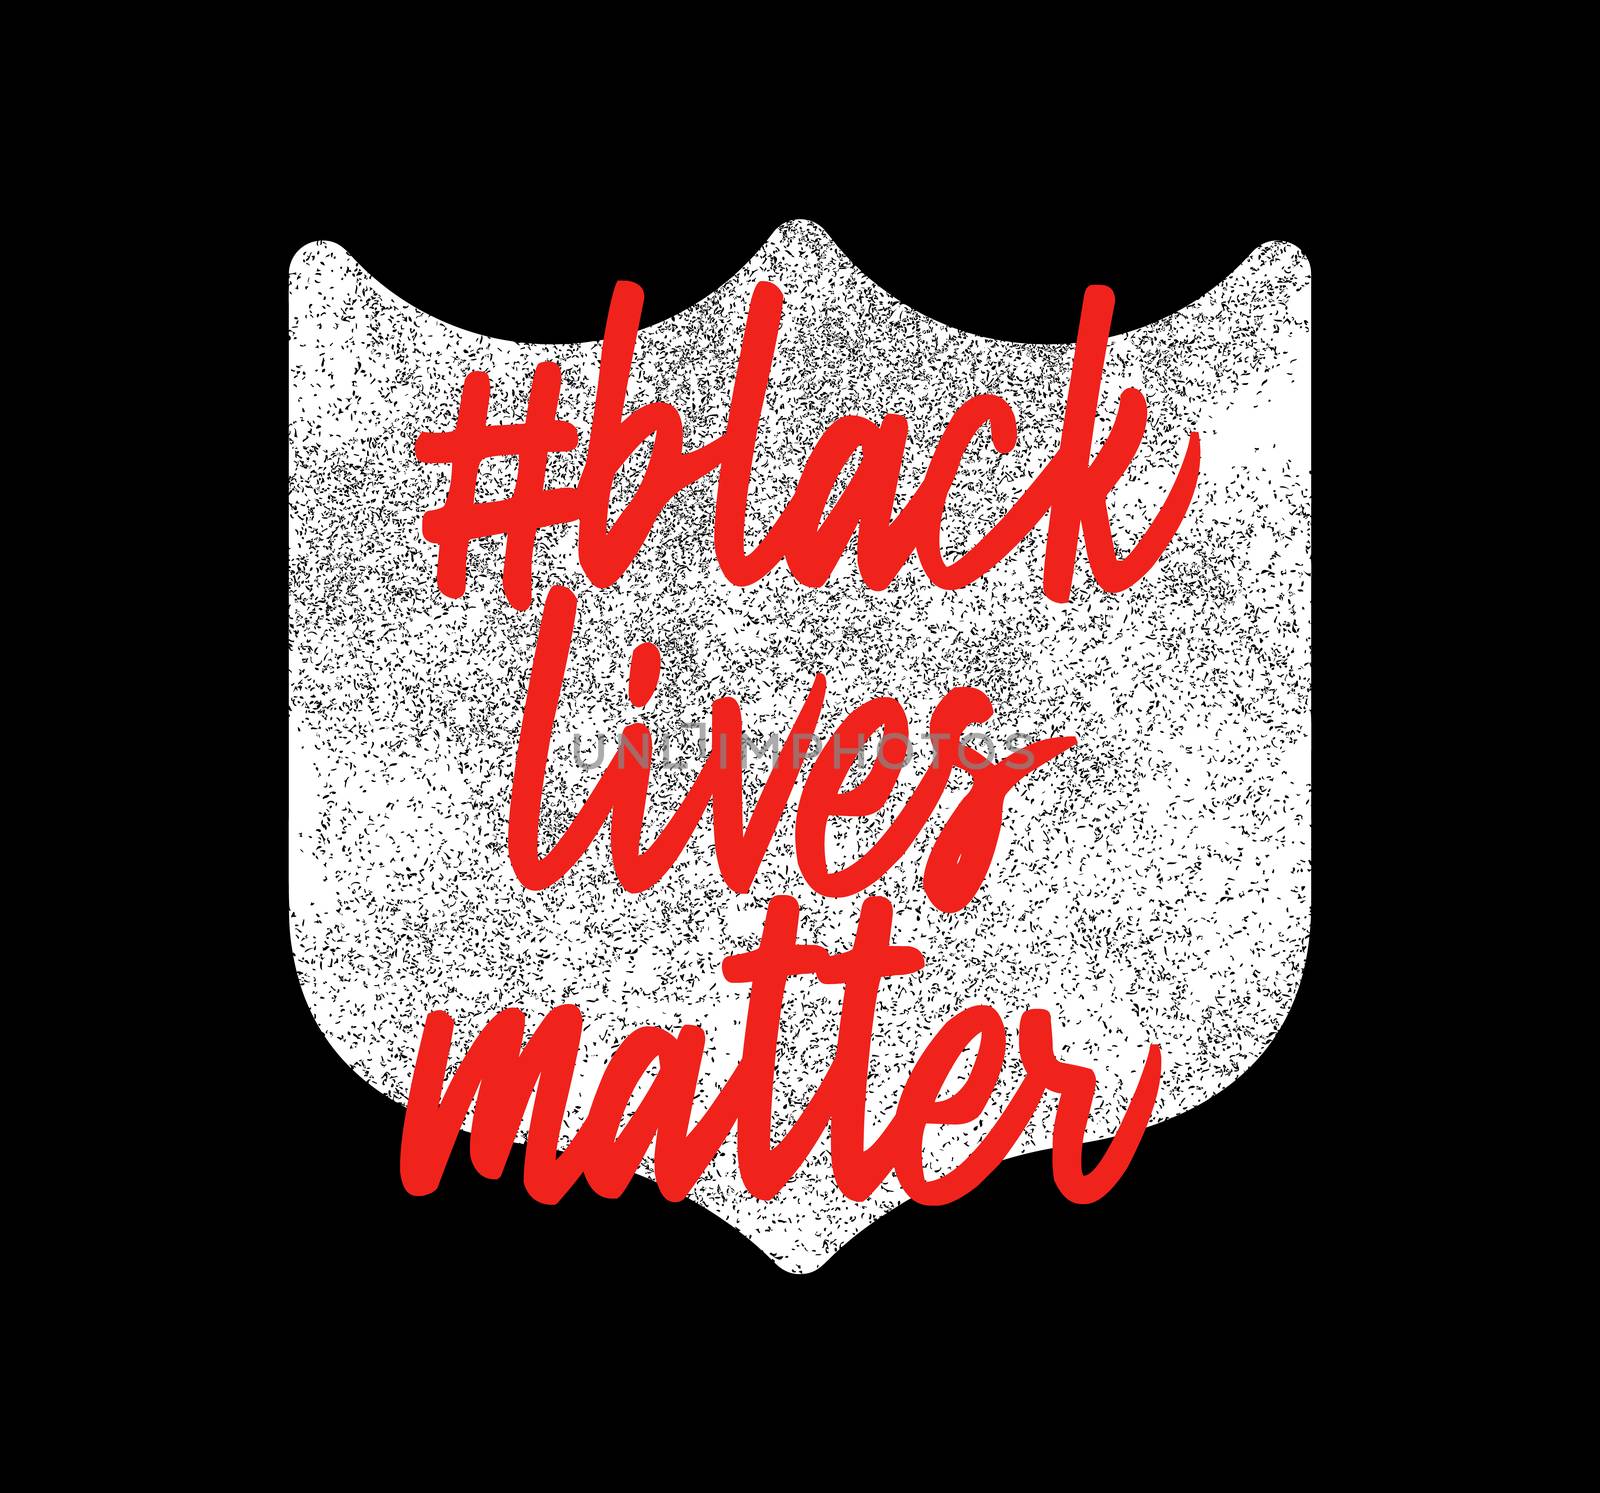 Black lives matter on guard shield. No to racism.Police violence. stop violence.Flat vector illustration.For banners, posters, and social networks by lunarts